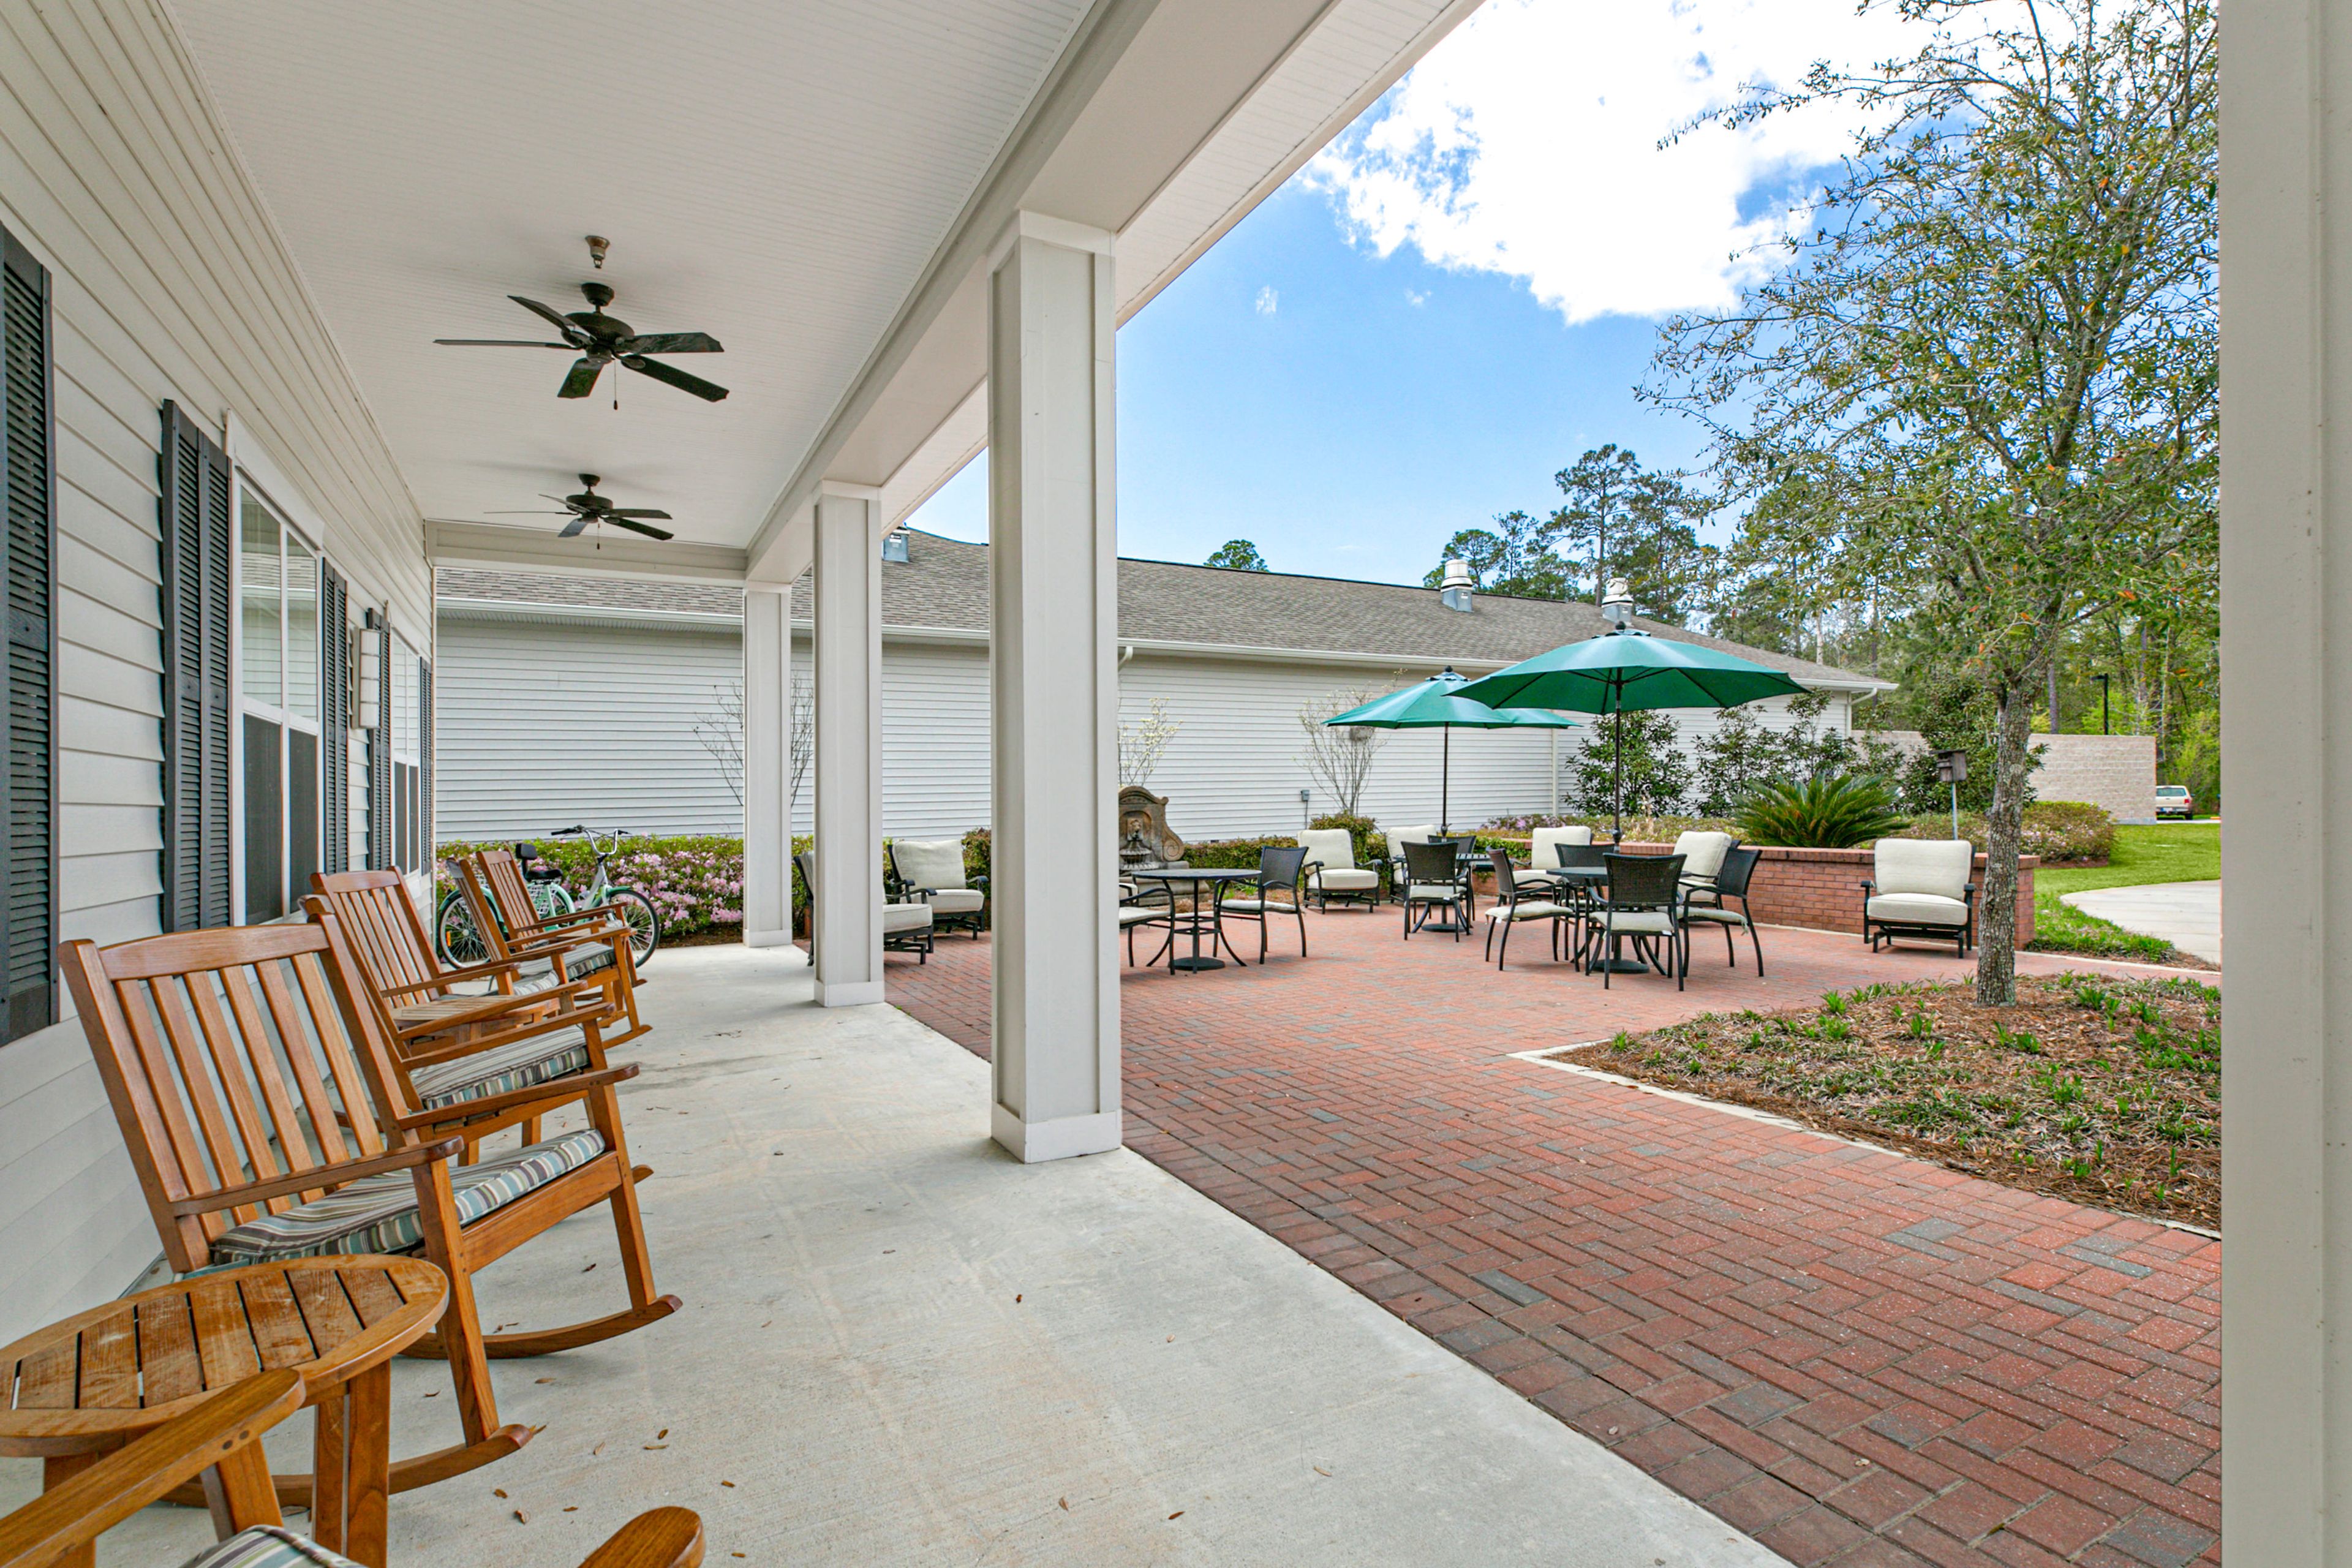 Senior living community, St. Anthony's Gardens, featuring a path, patio with furniture, and indoor amenities.